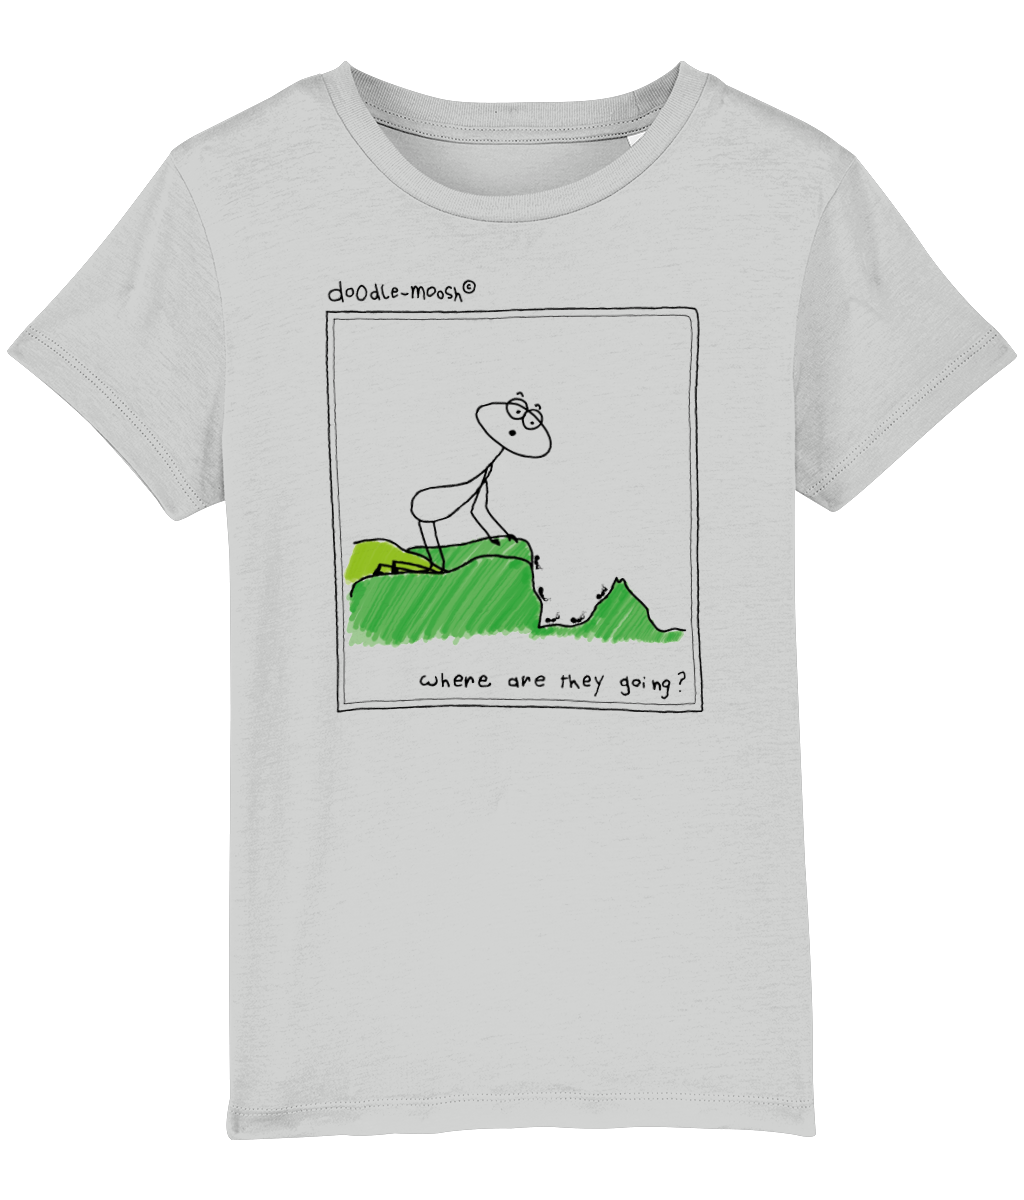 Where are they going t-shirt, grey with black, colourful drawing